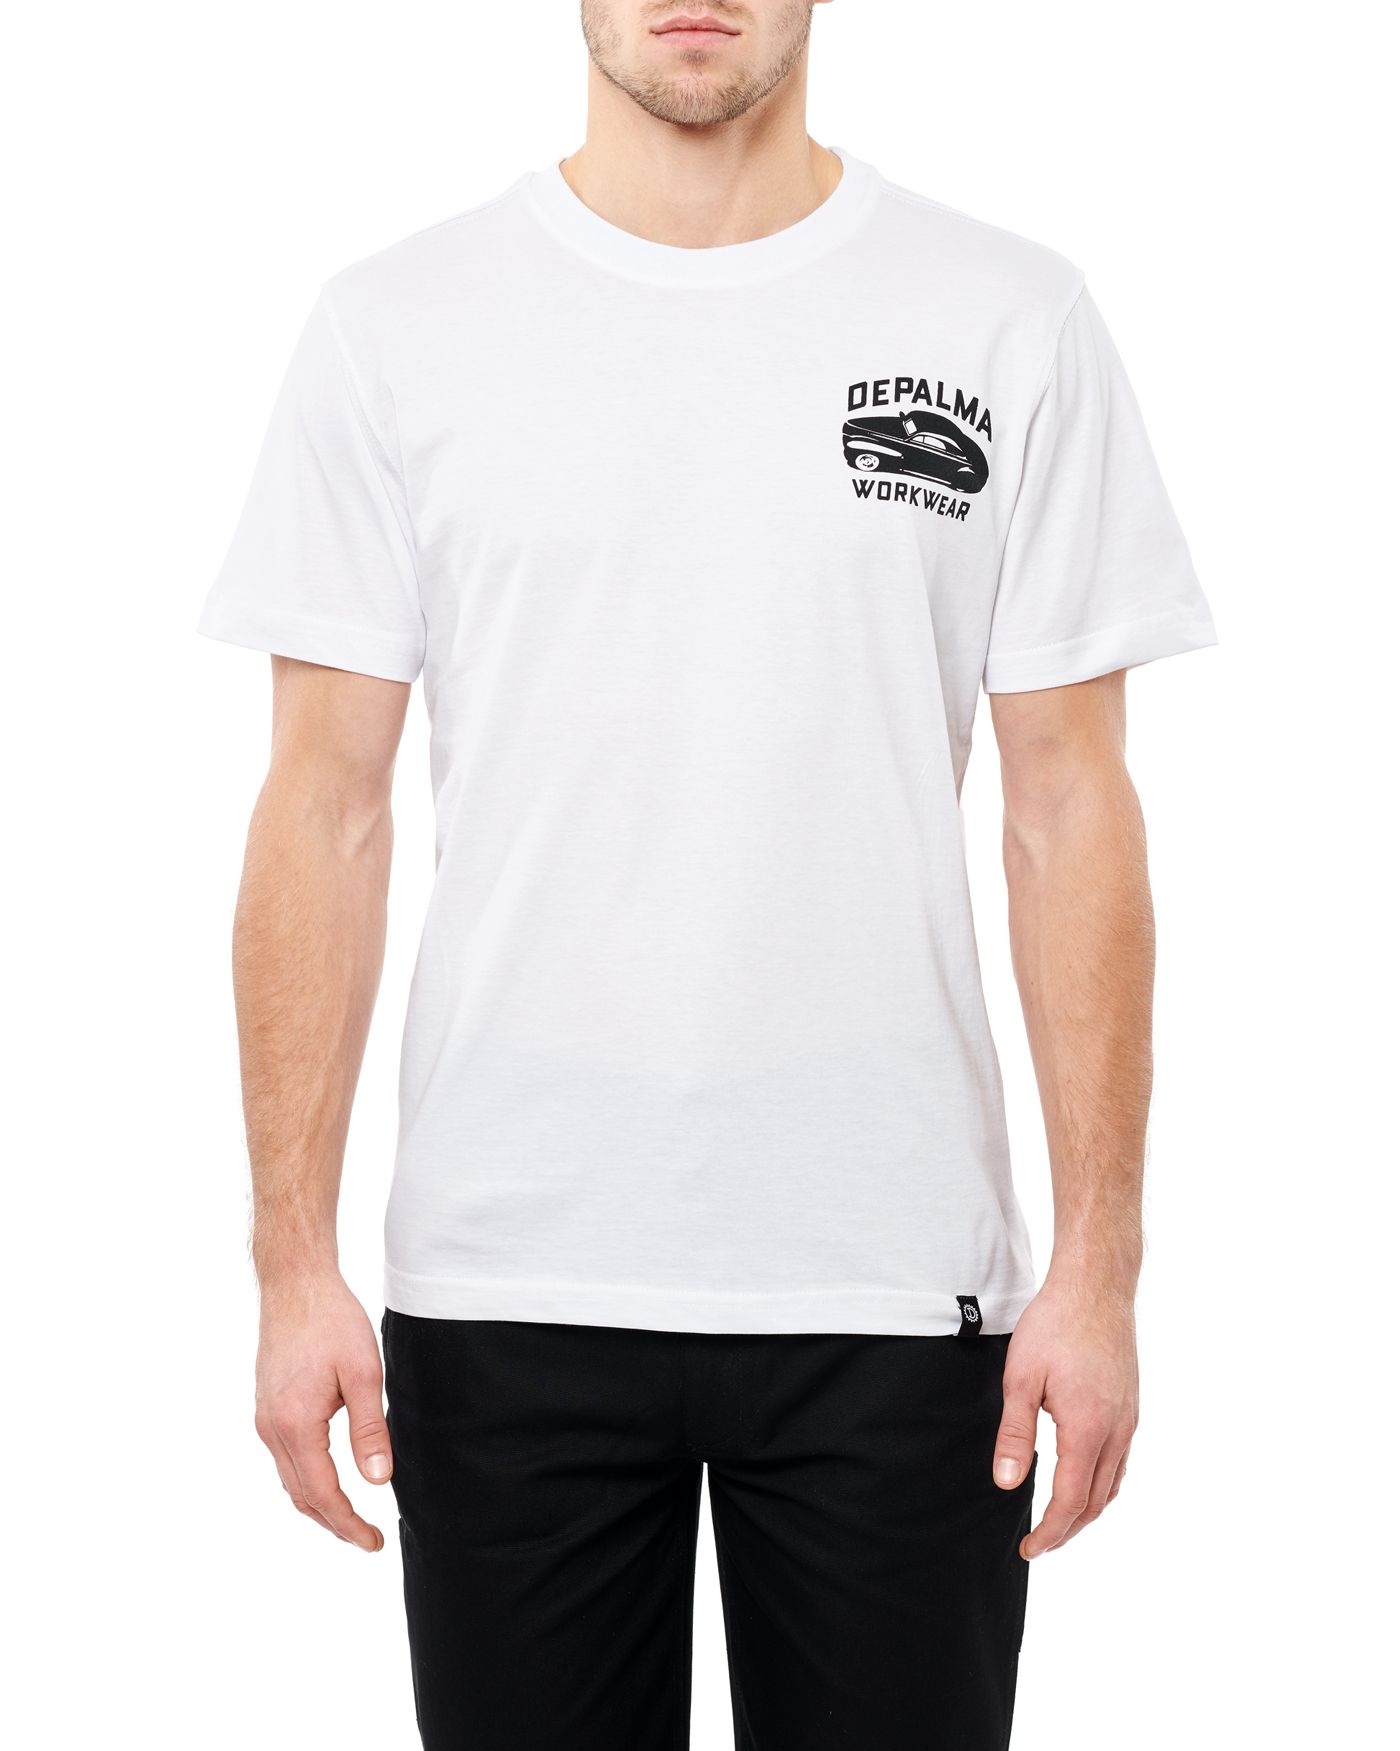 Photo of Outlaw Pete S/S T-shirt, White